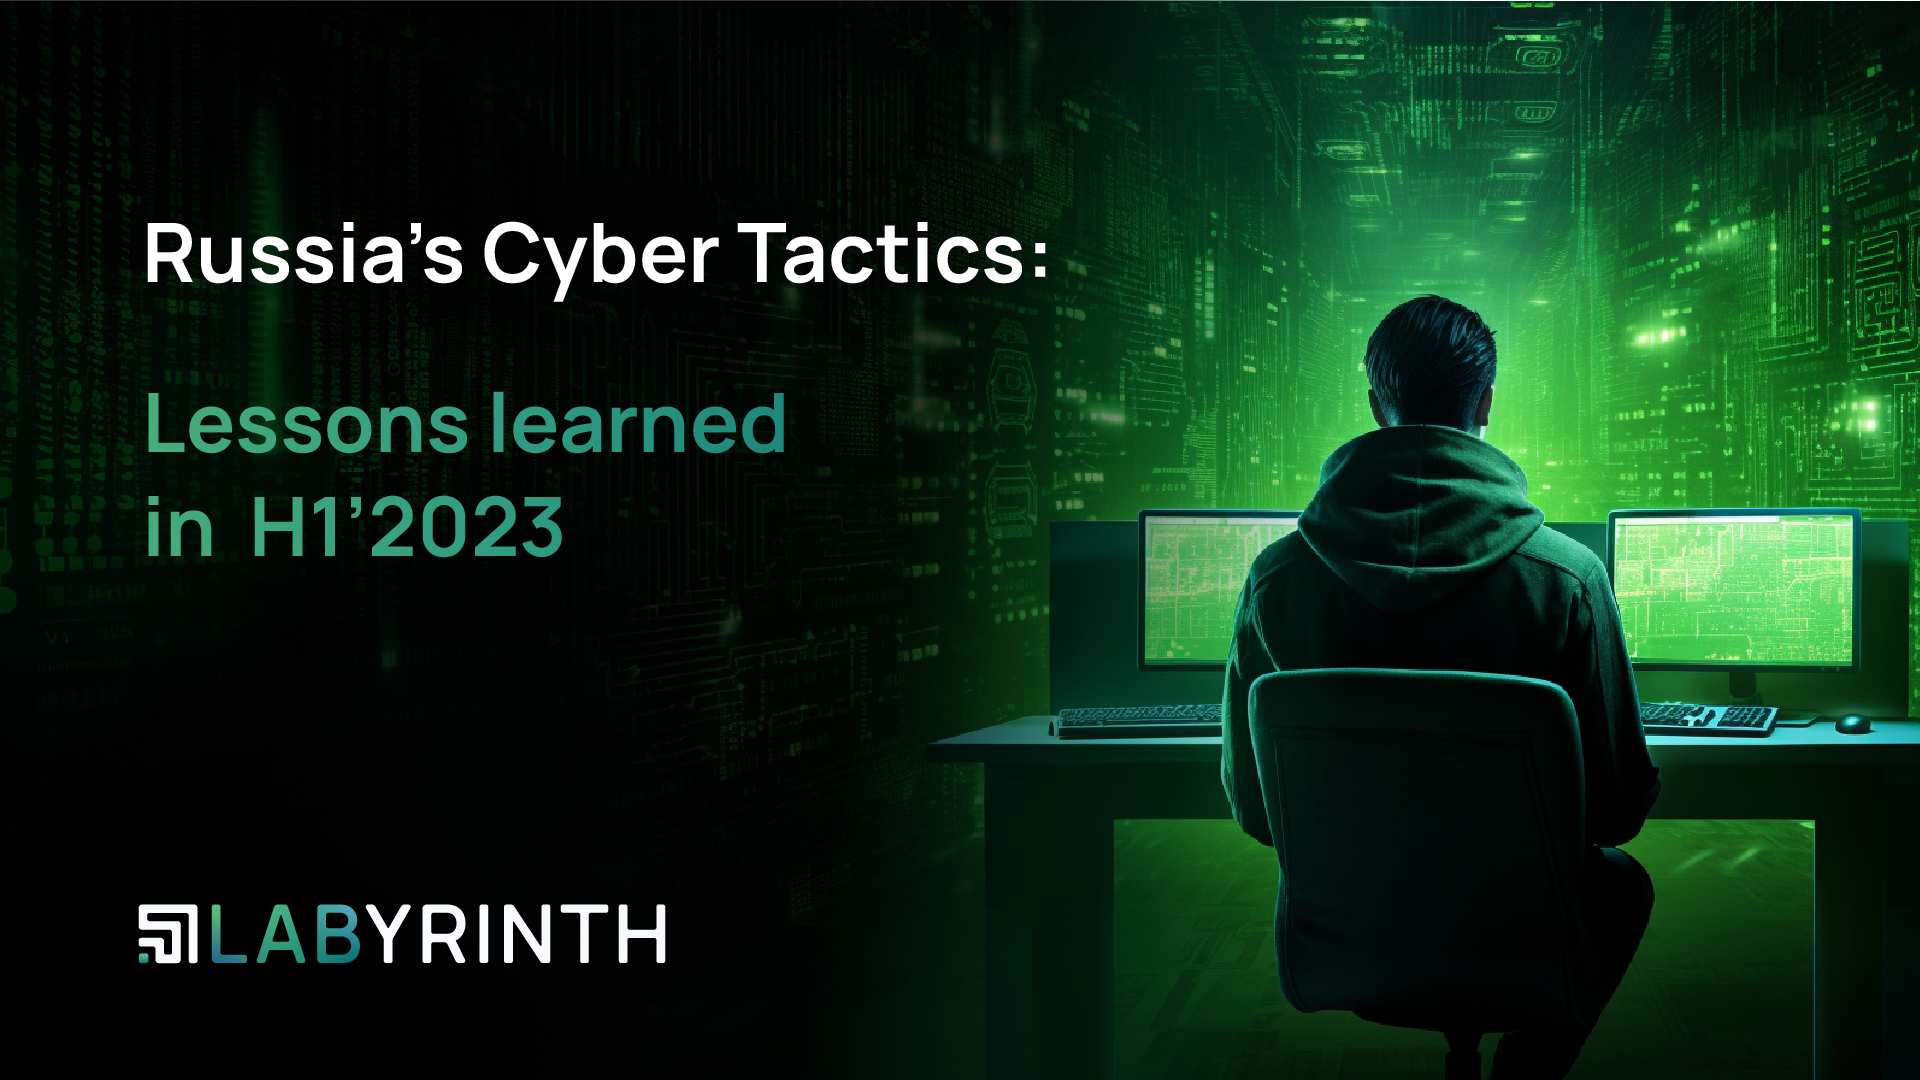 Key insights from Threat Research Report “Russia's Cyber Tactics: Lessons Learnt in H1’2023”